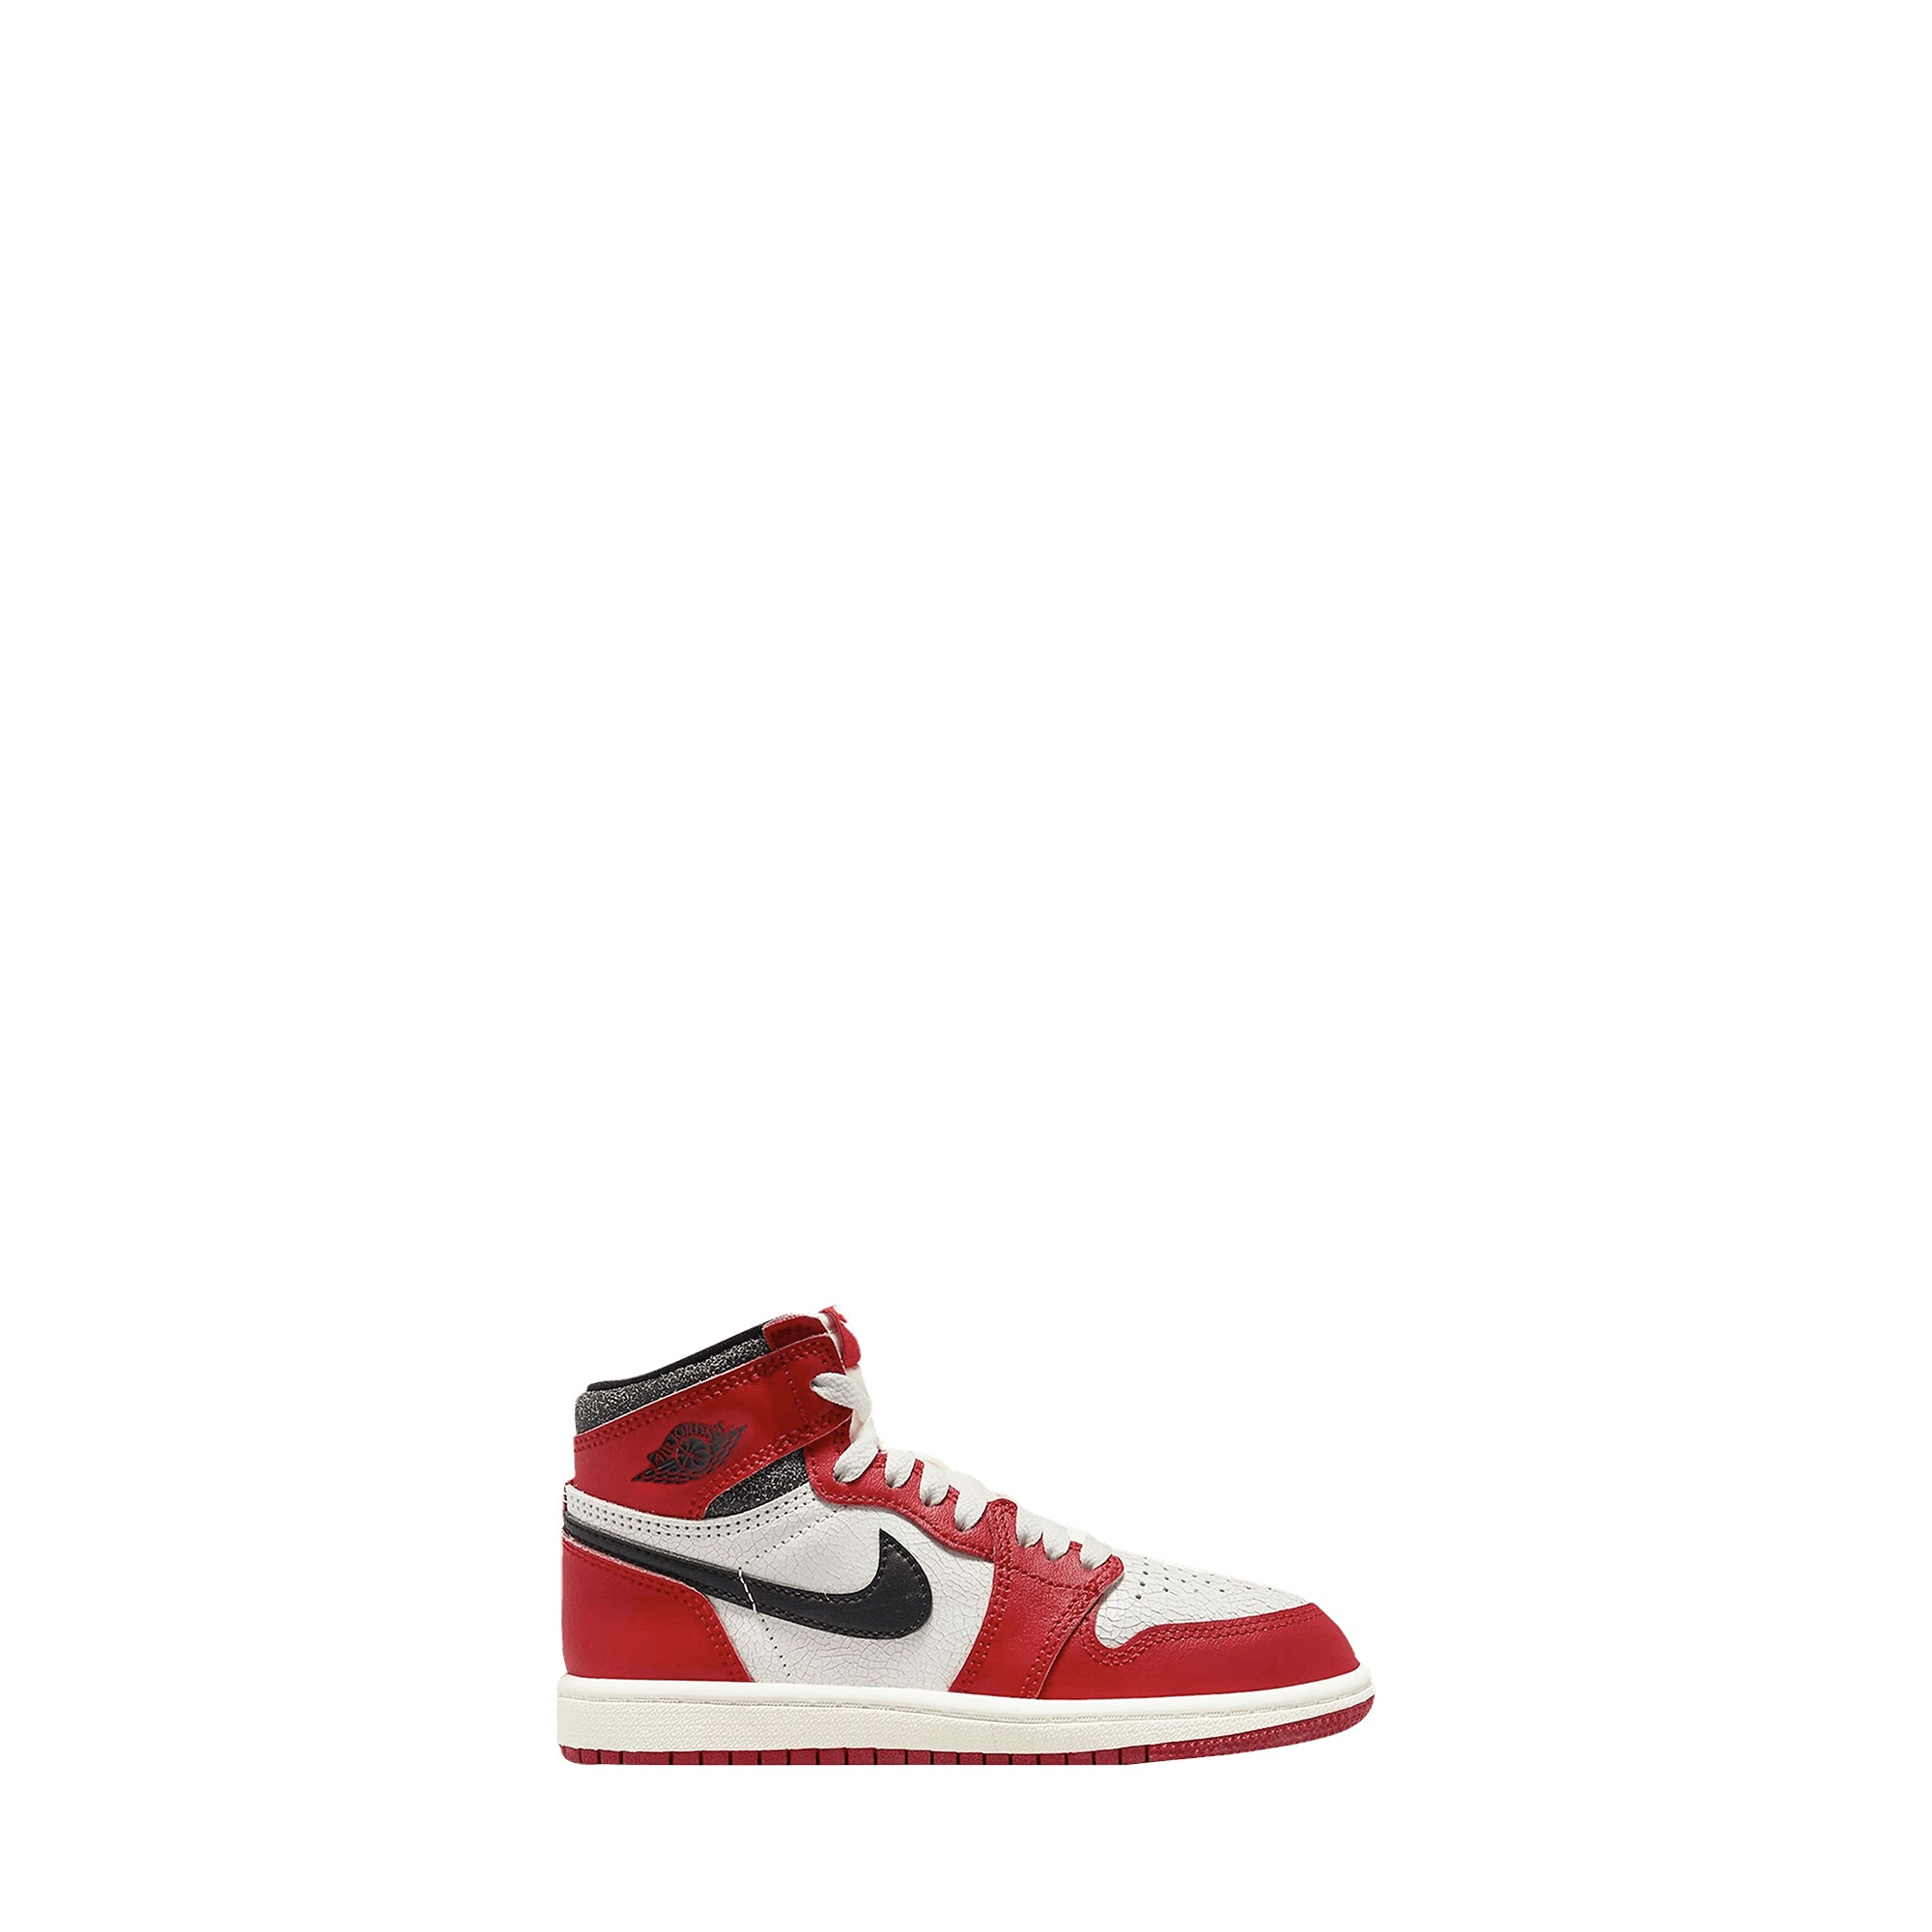 Jordan 1 Retro High OG Chicago Lost and Found (PS)-PLUS